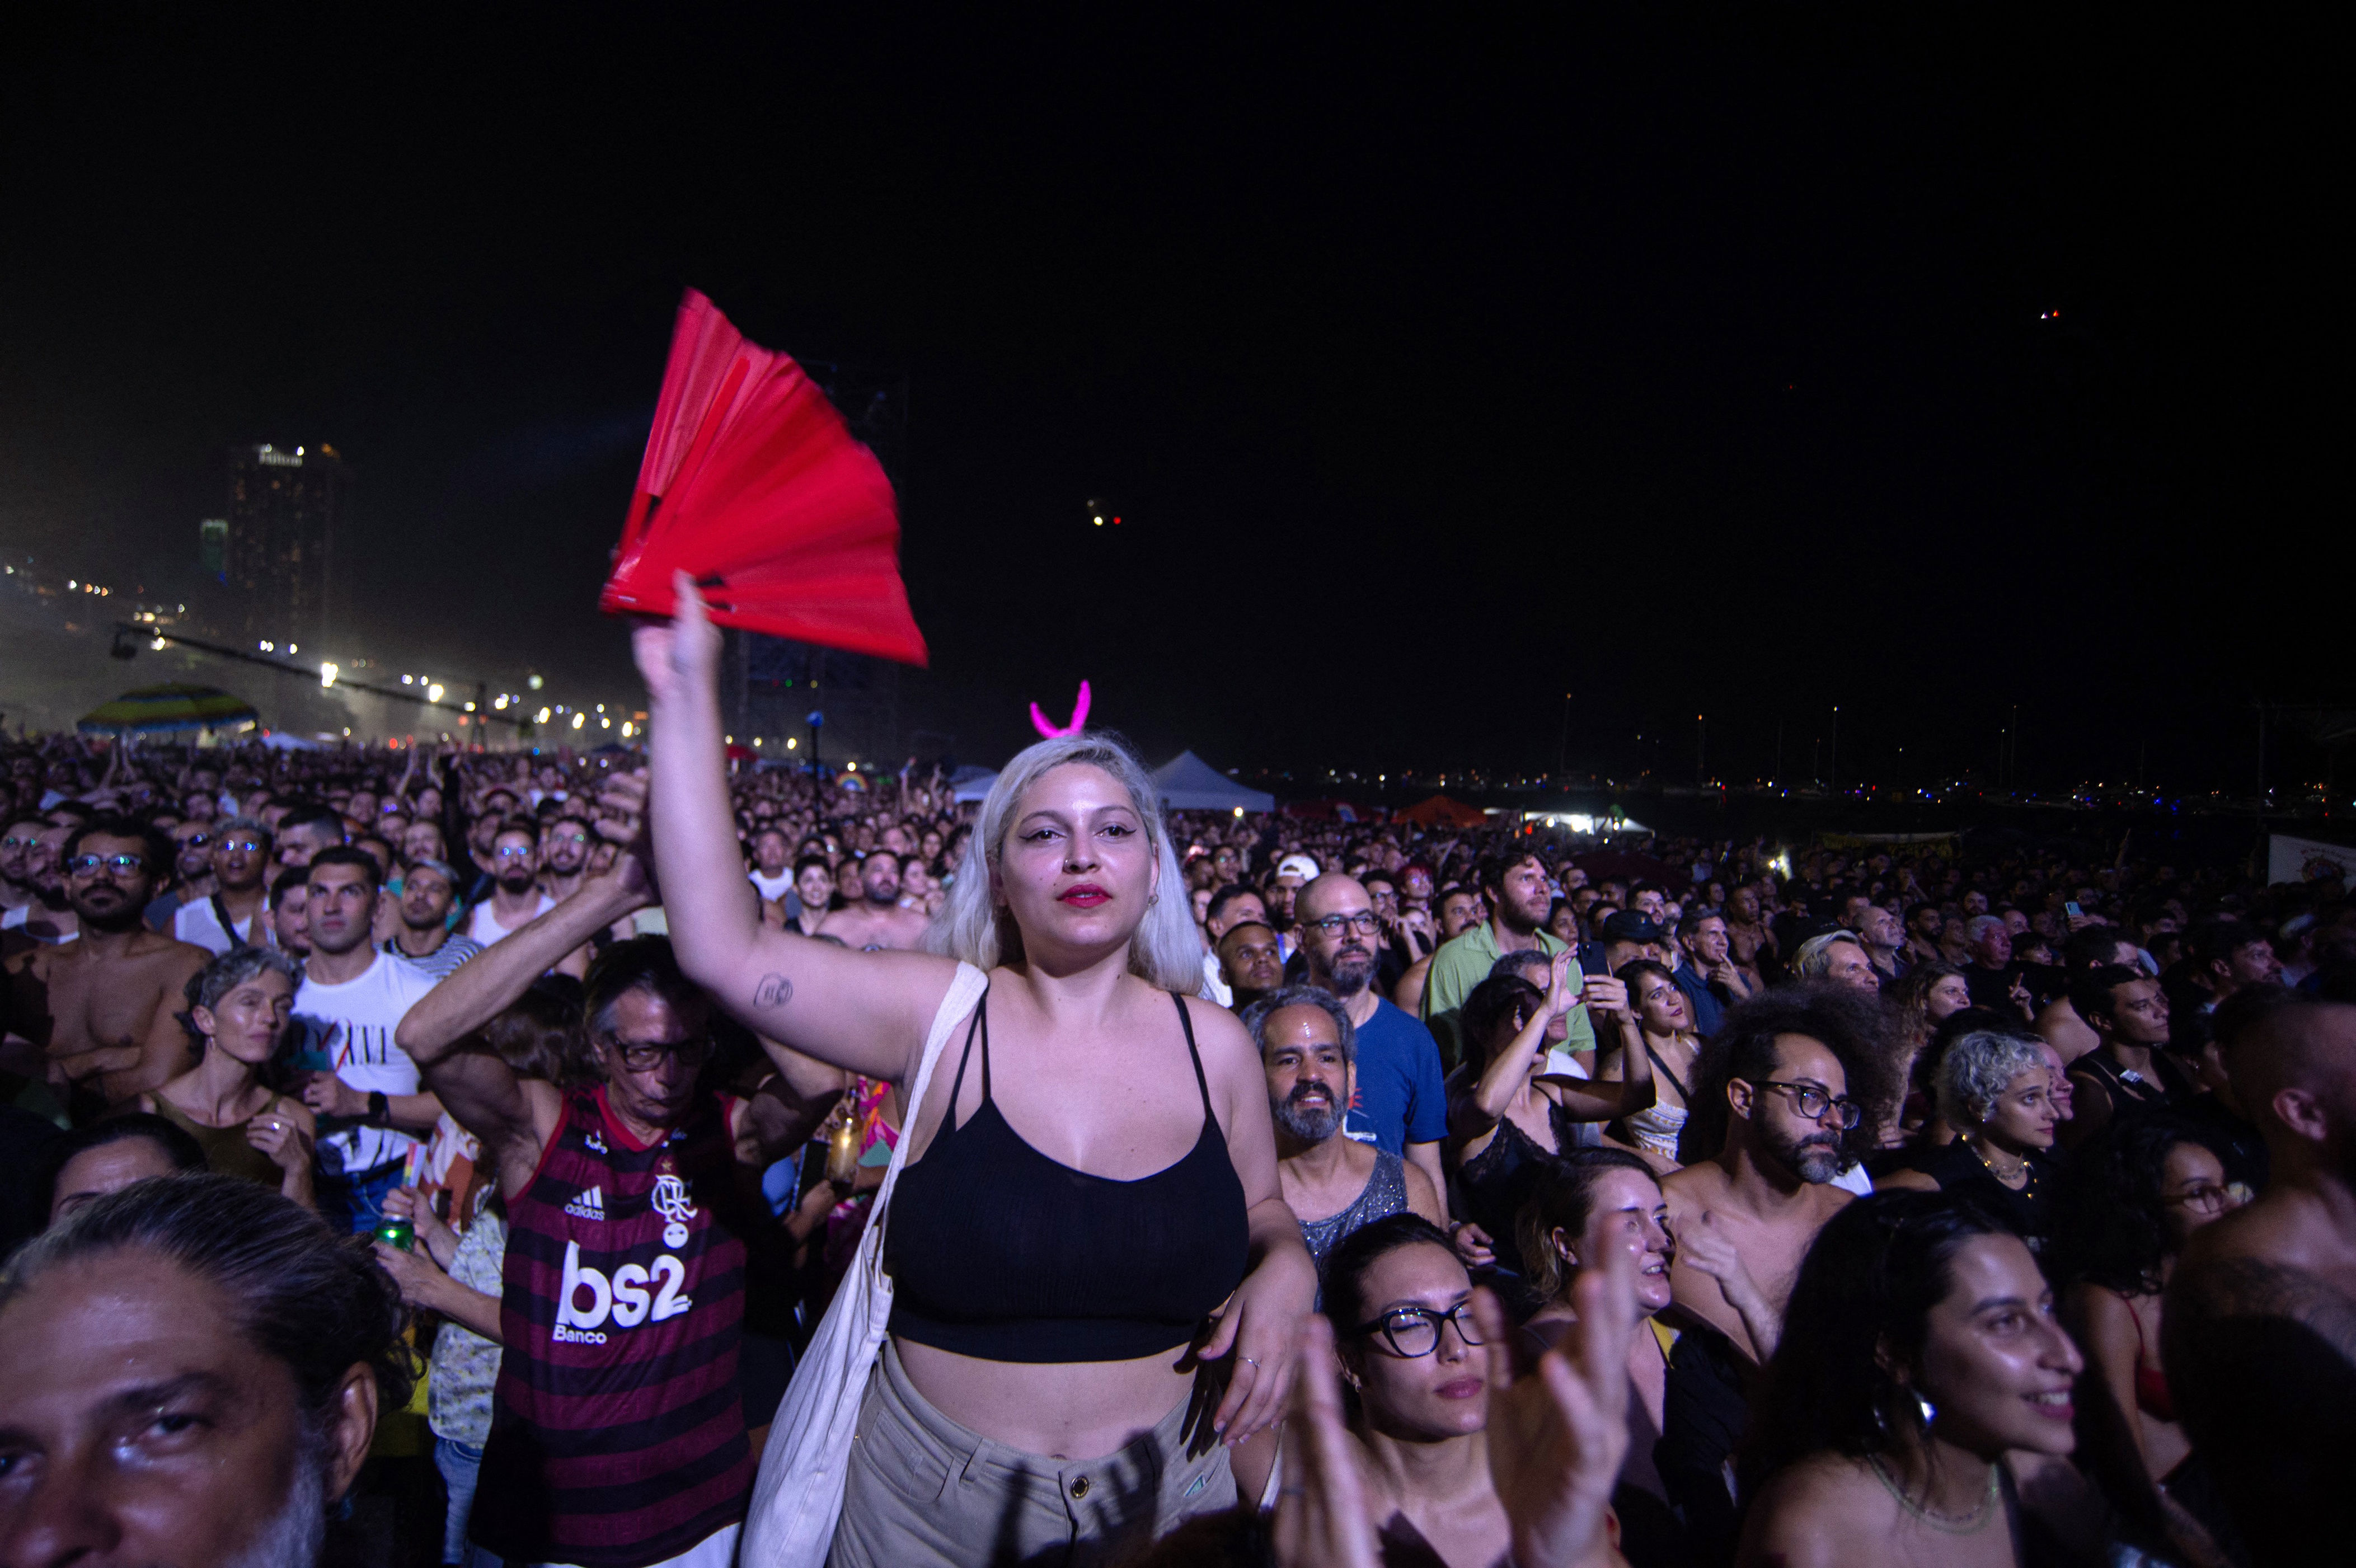 how to, madonna ends celebration tour with biggest ever show to over a million fans at rio’s copacabana beach